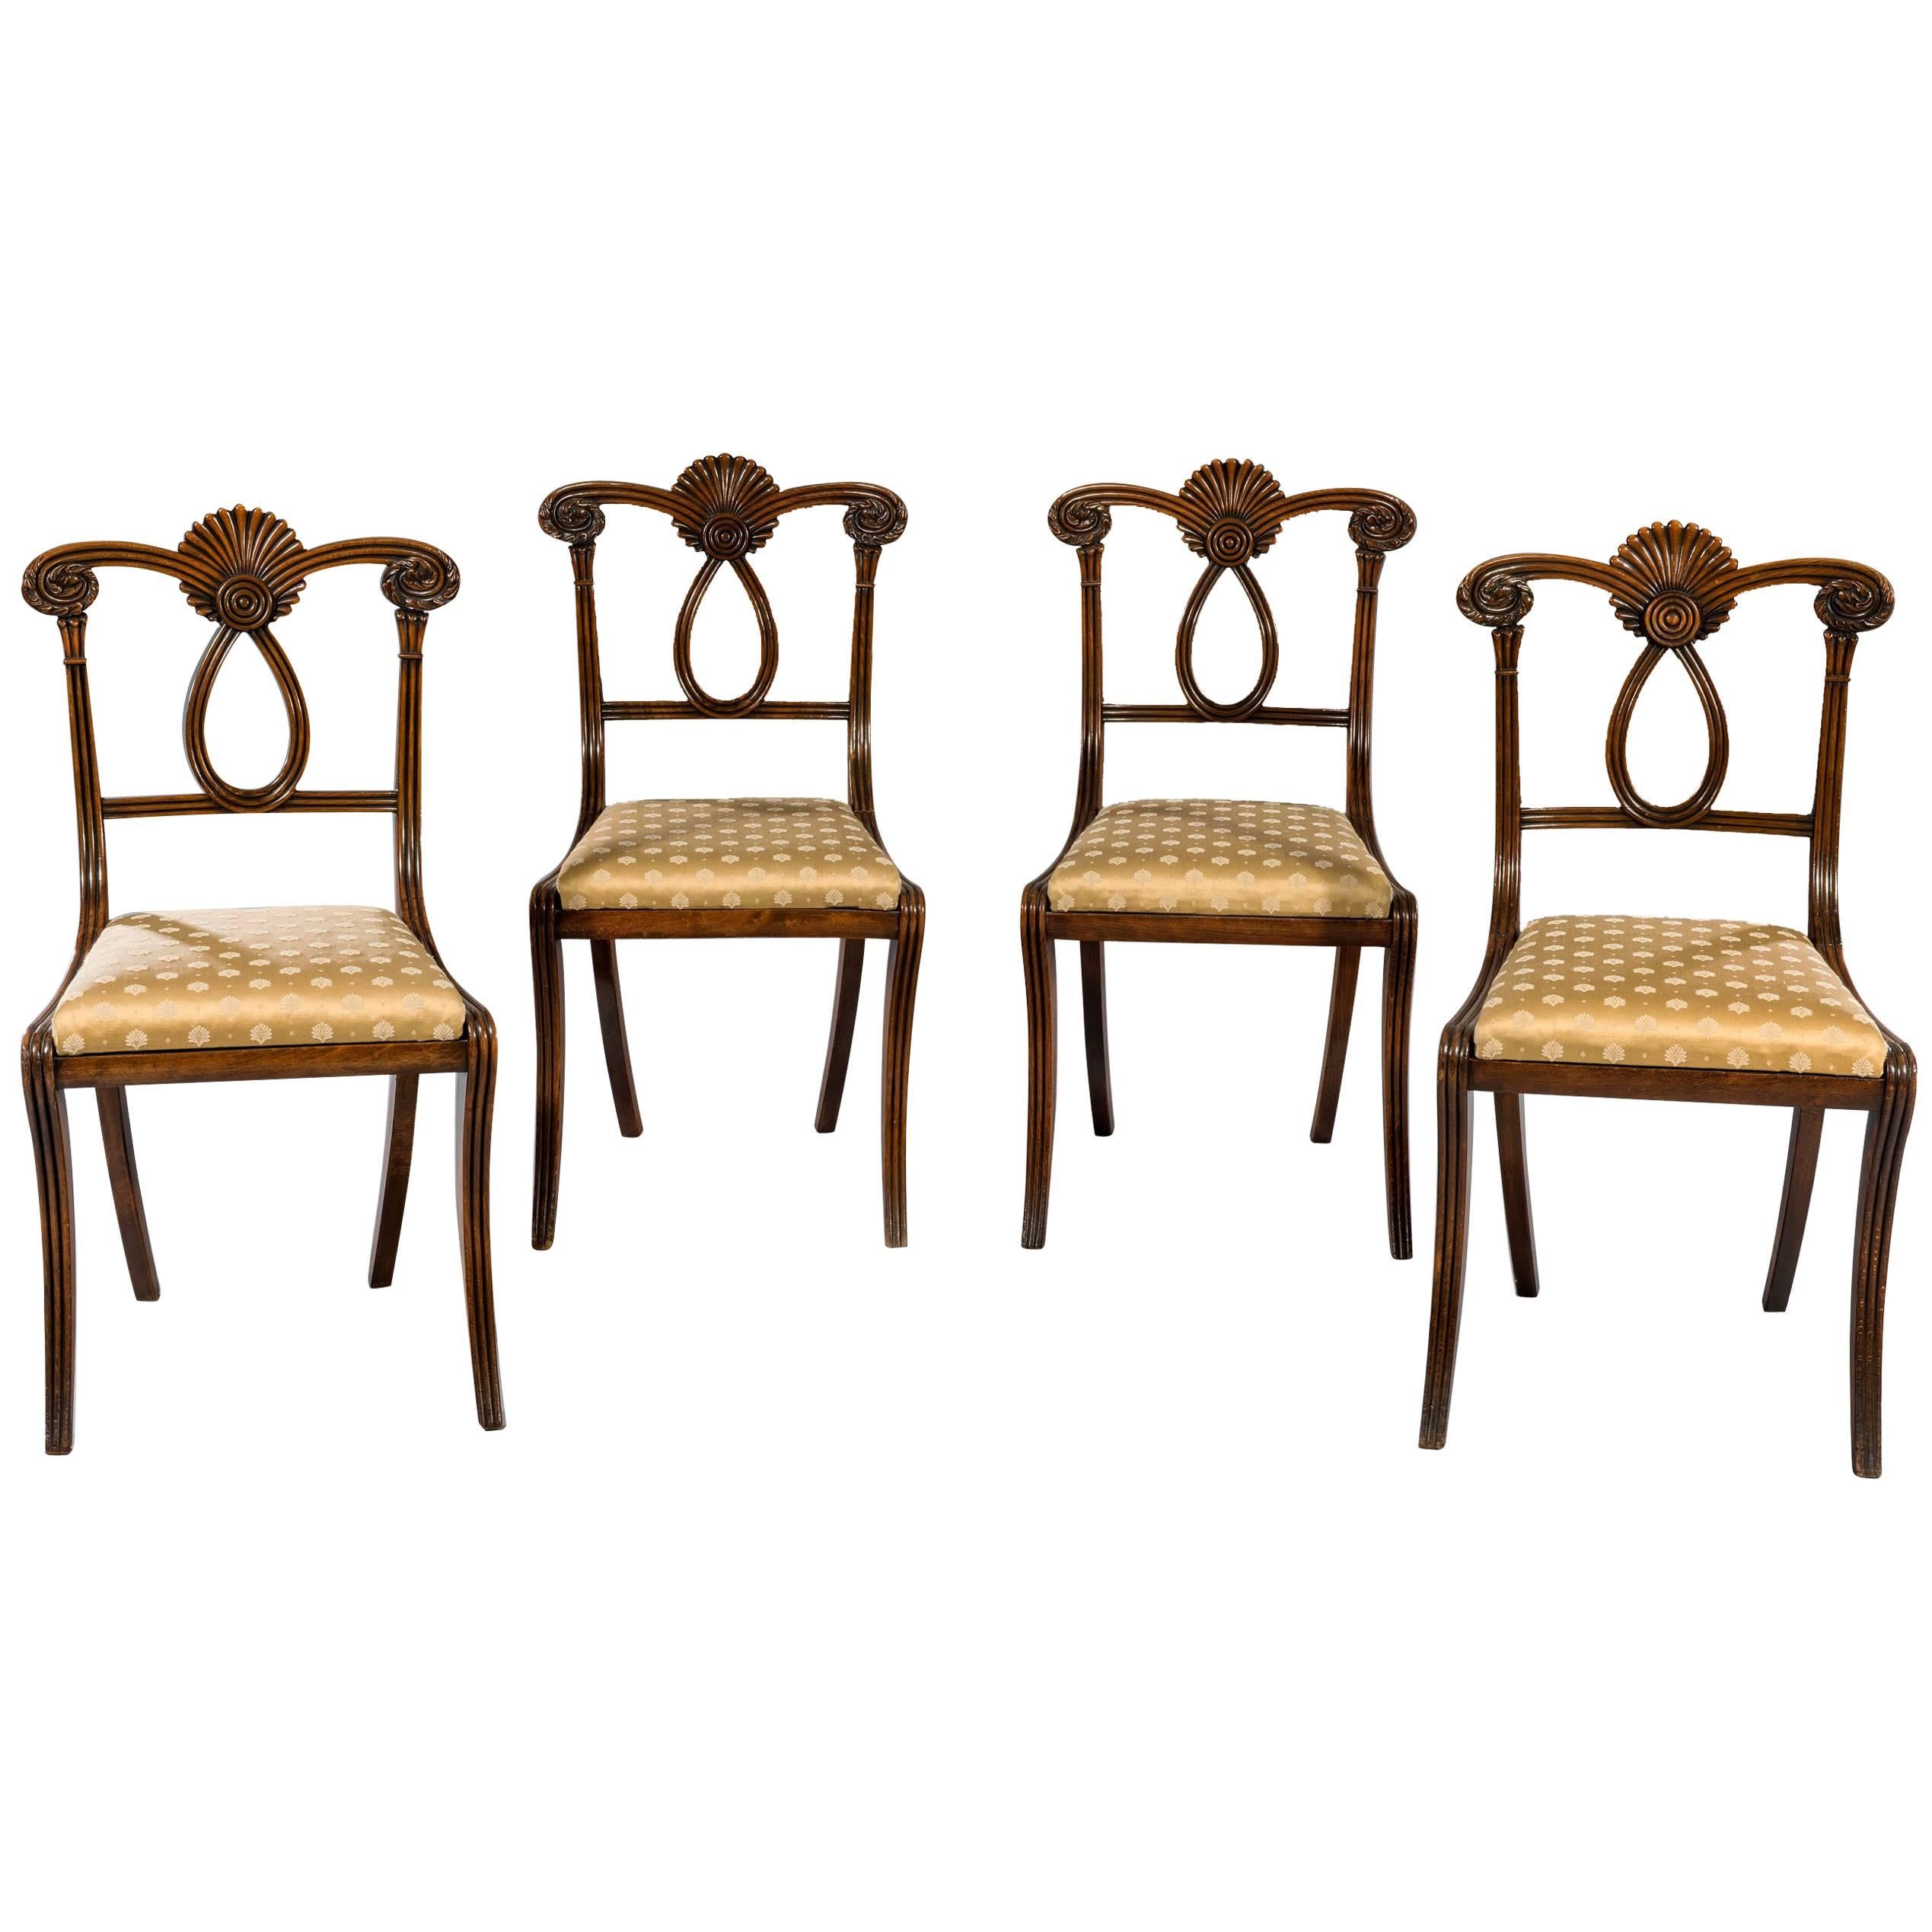 Set of Four Early 19th Century Regency Period Carved Beechwood Side Chairs For Sale